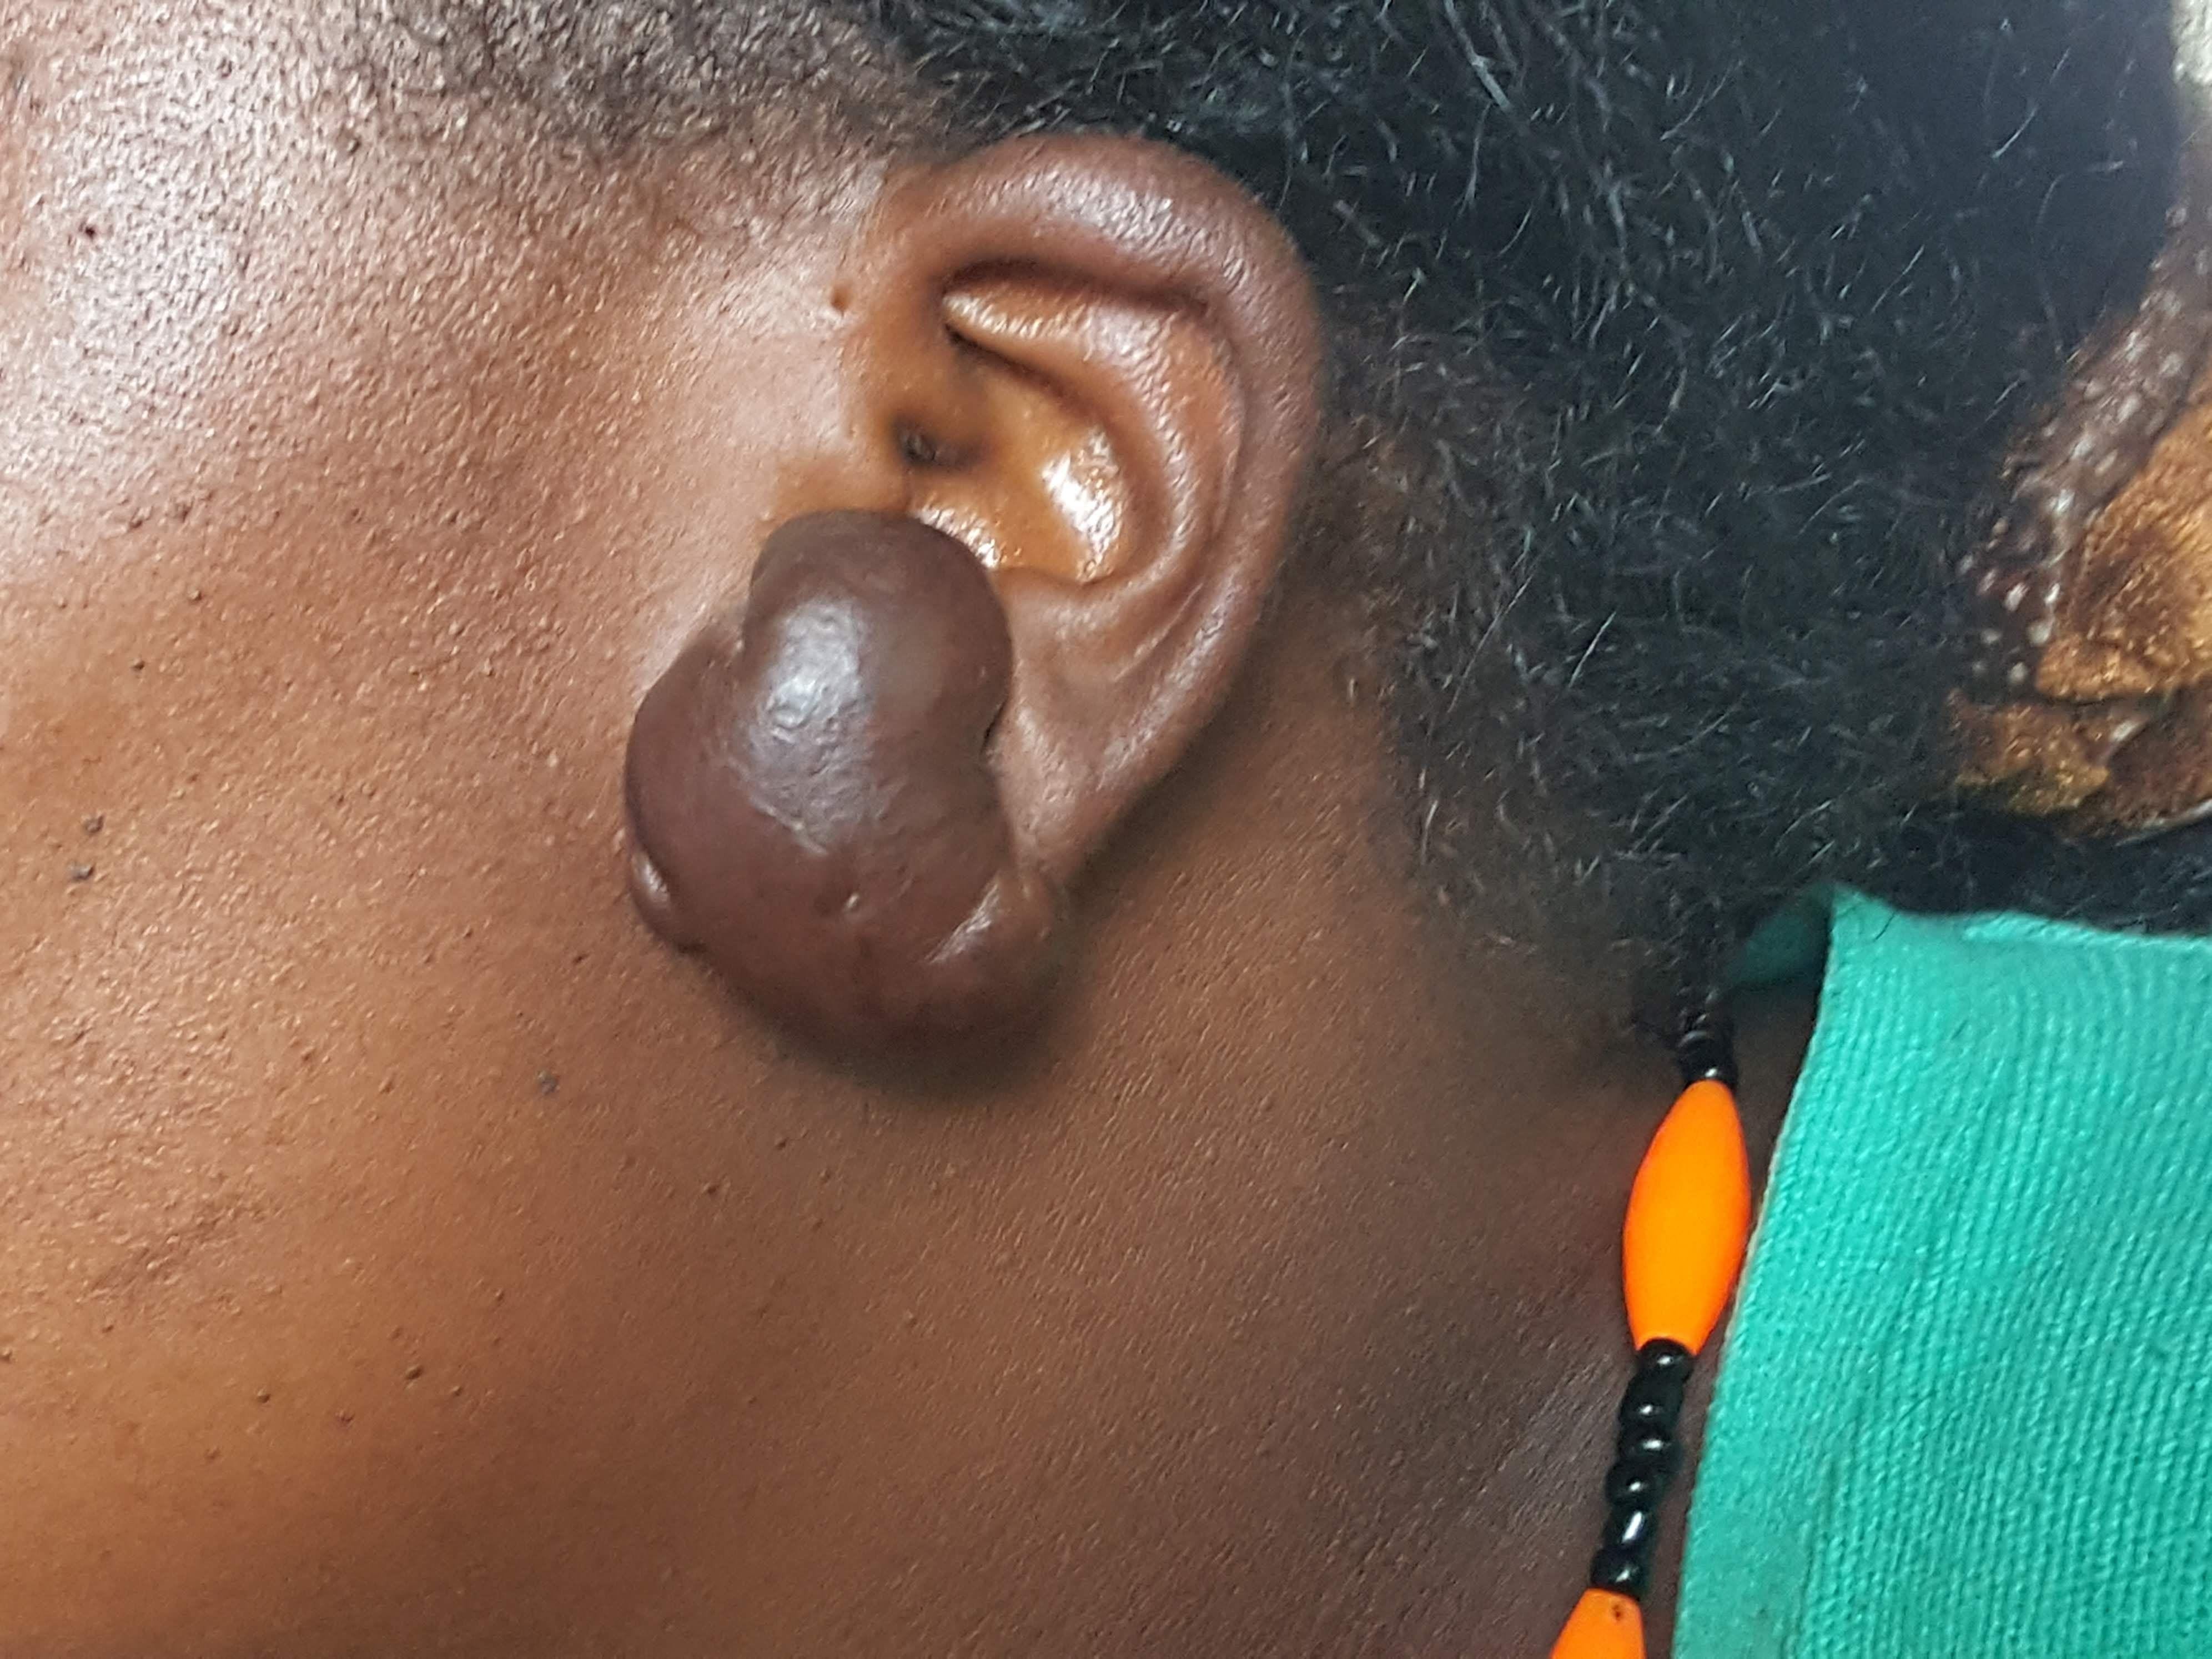 Boy With A Lump On His Ear